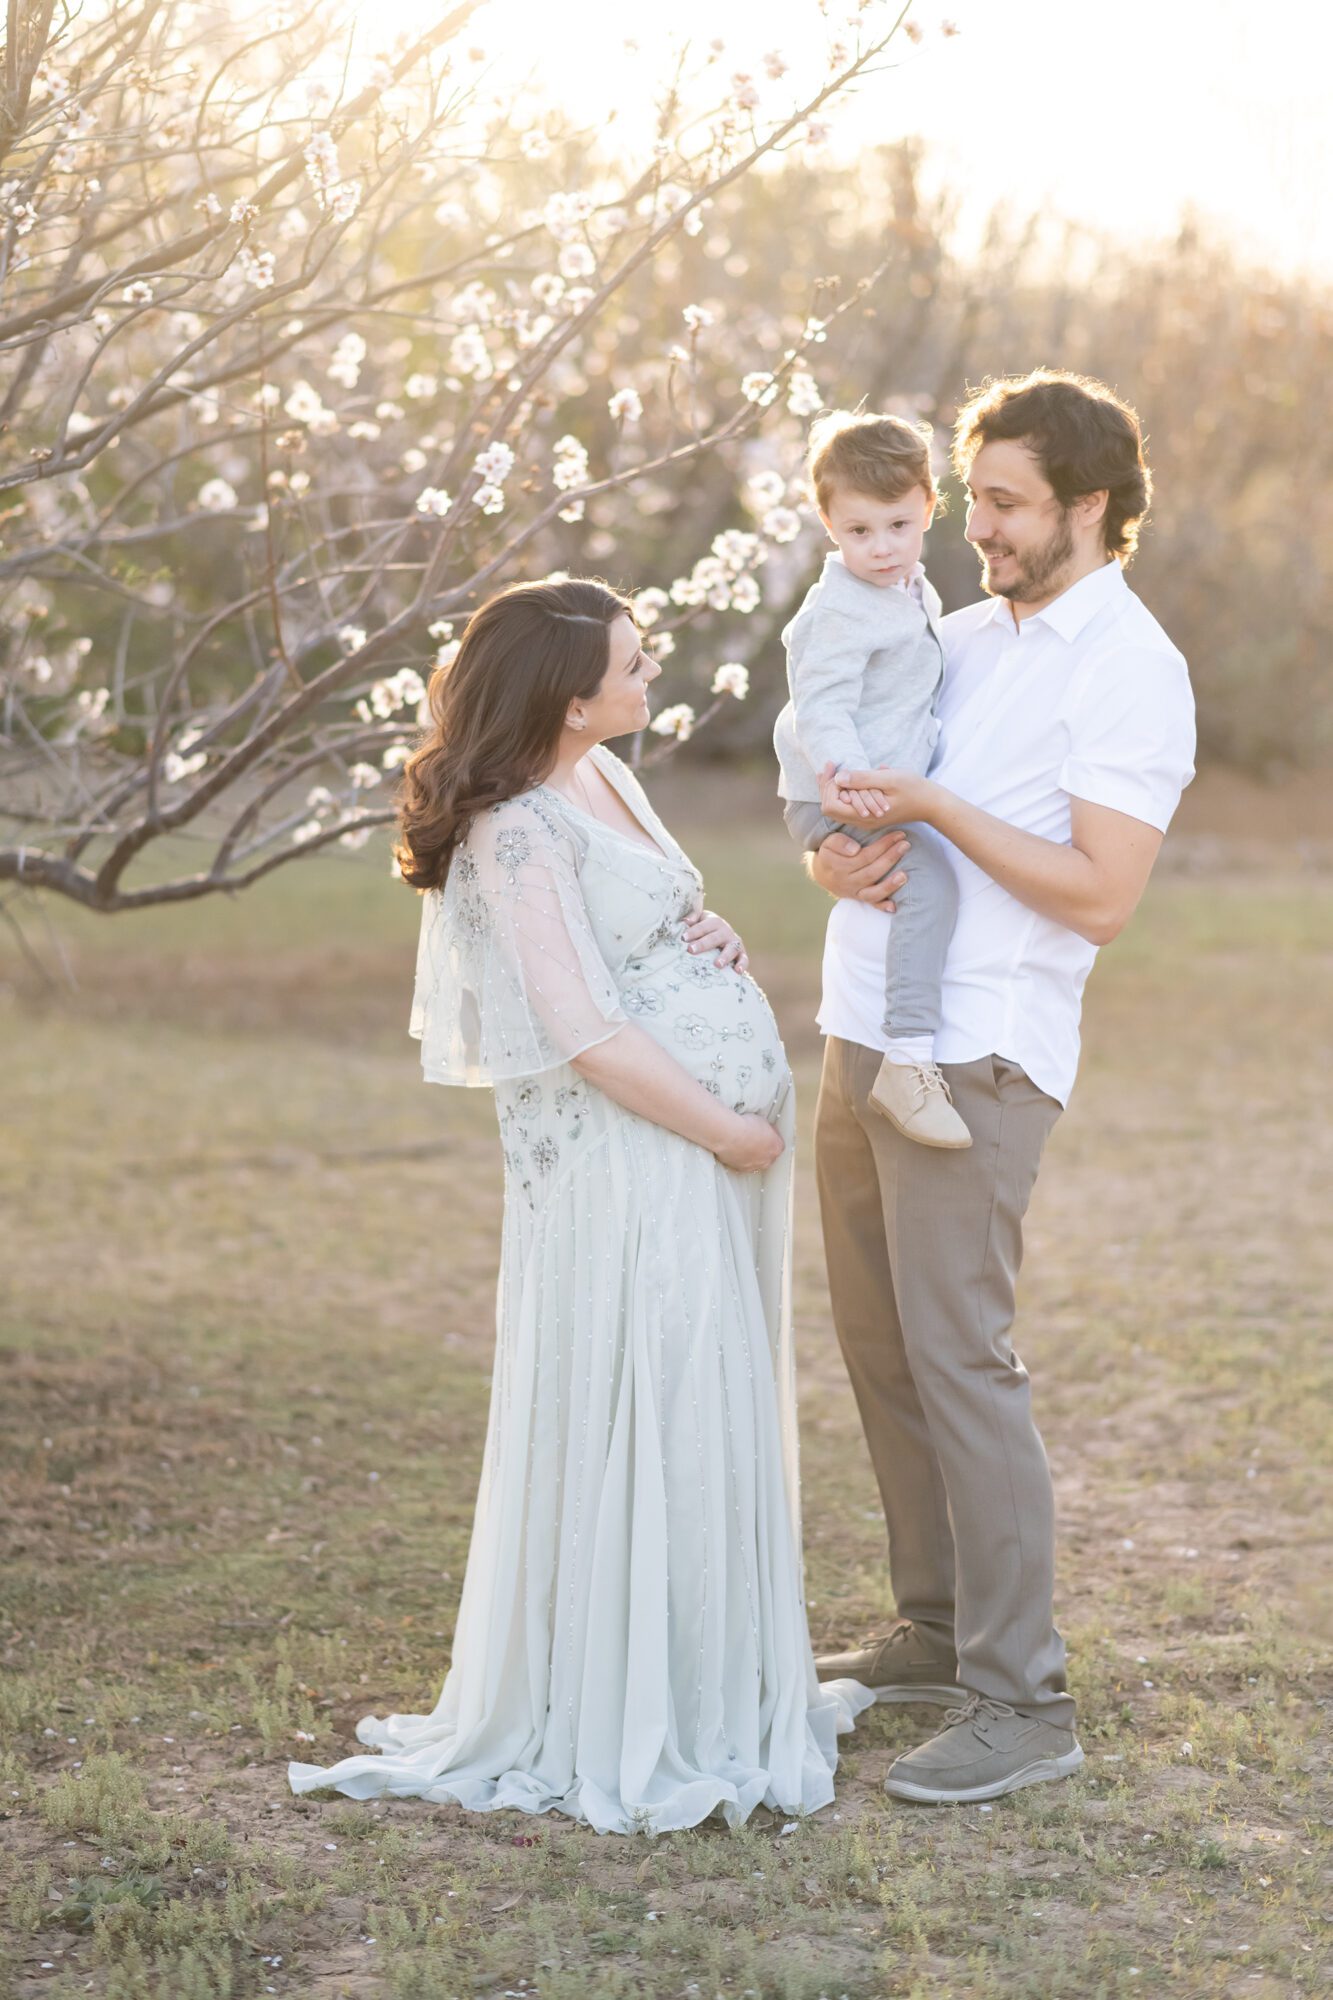 Arizona Maternity, Newborn, Family, Baby, and Child Photographer | Reaj Roberts Photography | Pregnancy photos with family outdoors